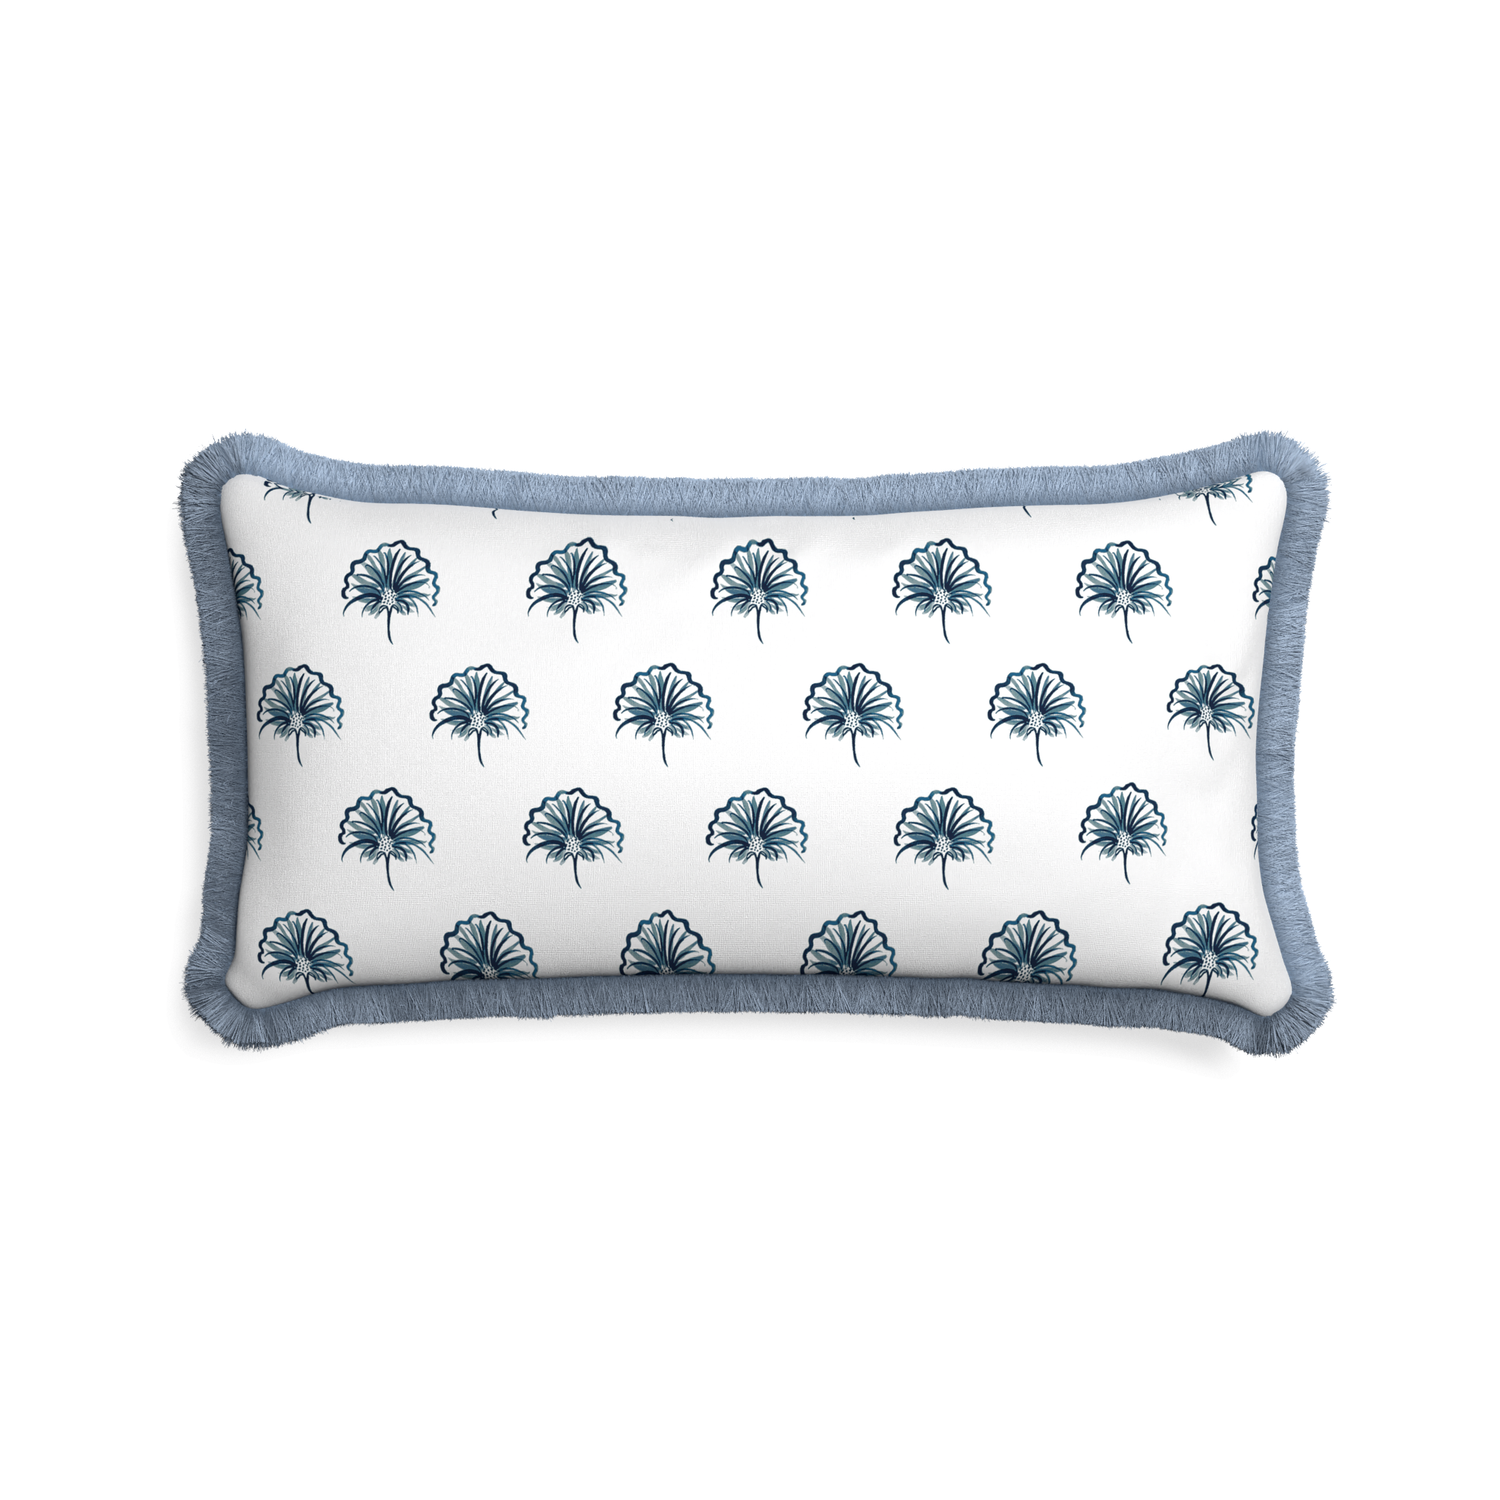 Midi-lumbar penelope midnight custom floral navypillow with sky fringe on white background